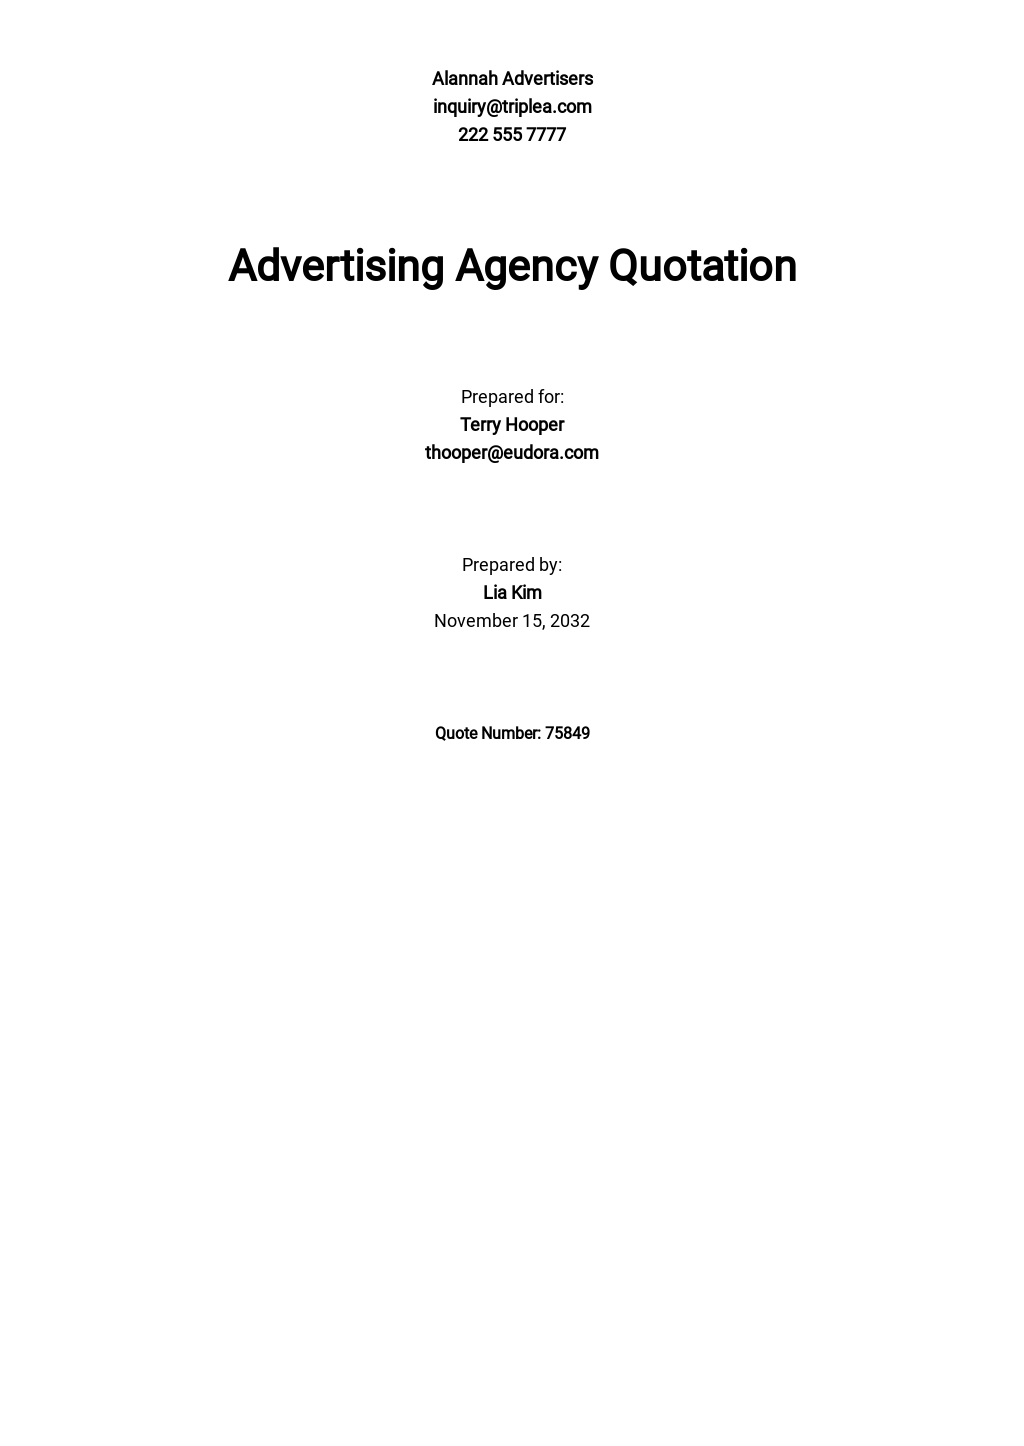 Simple Advertising Agency Quotation Template.jpe